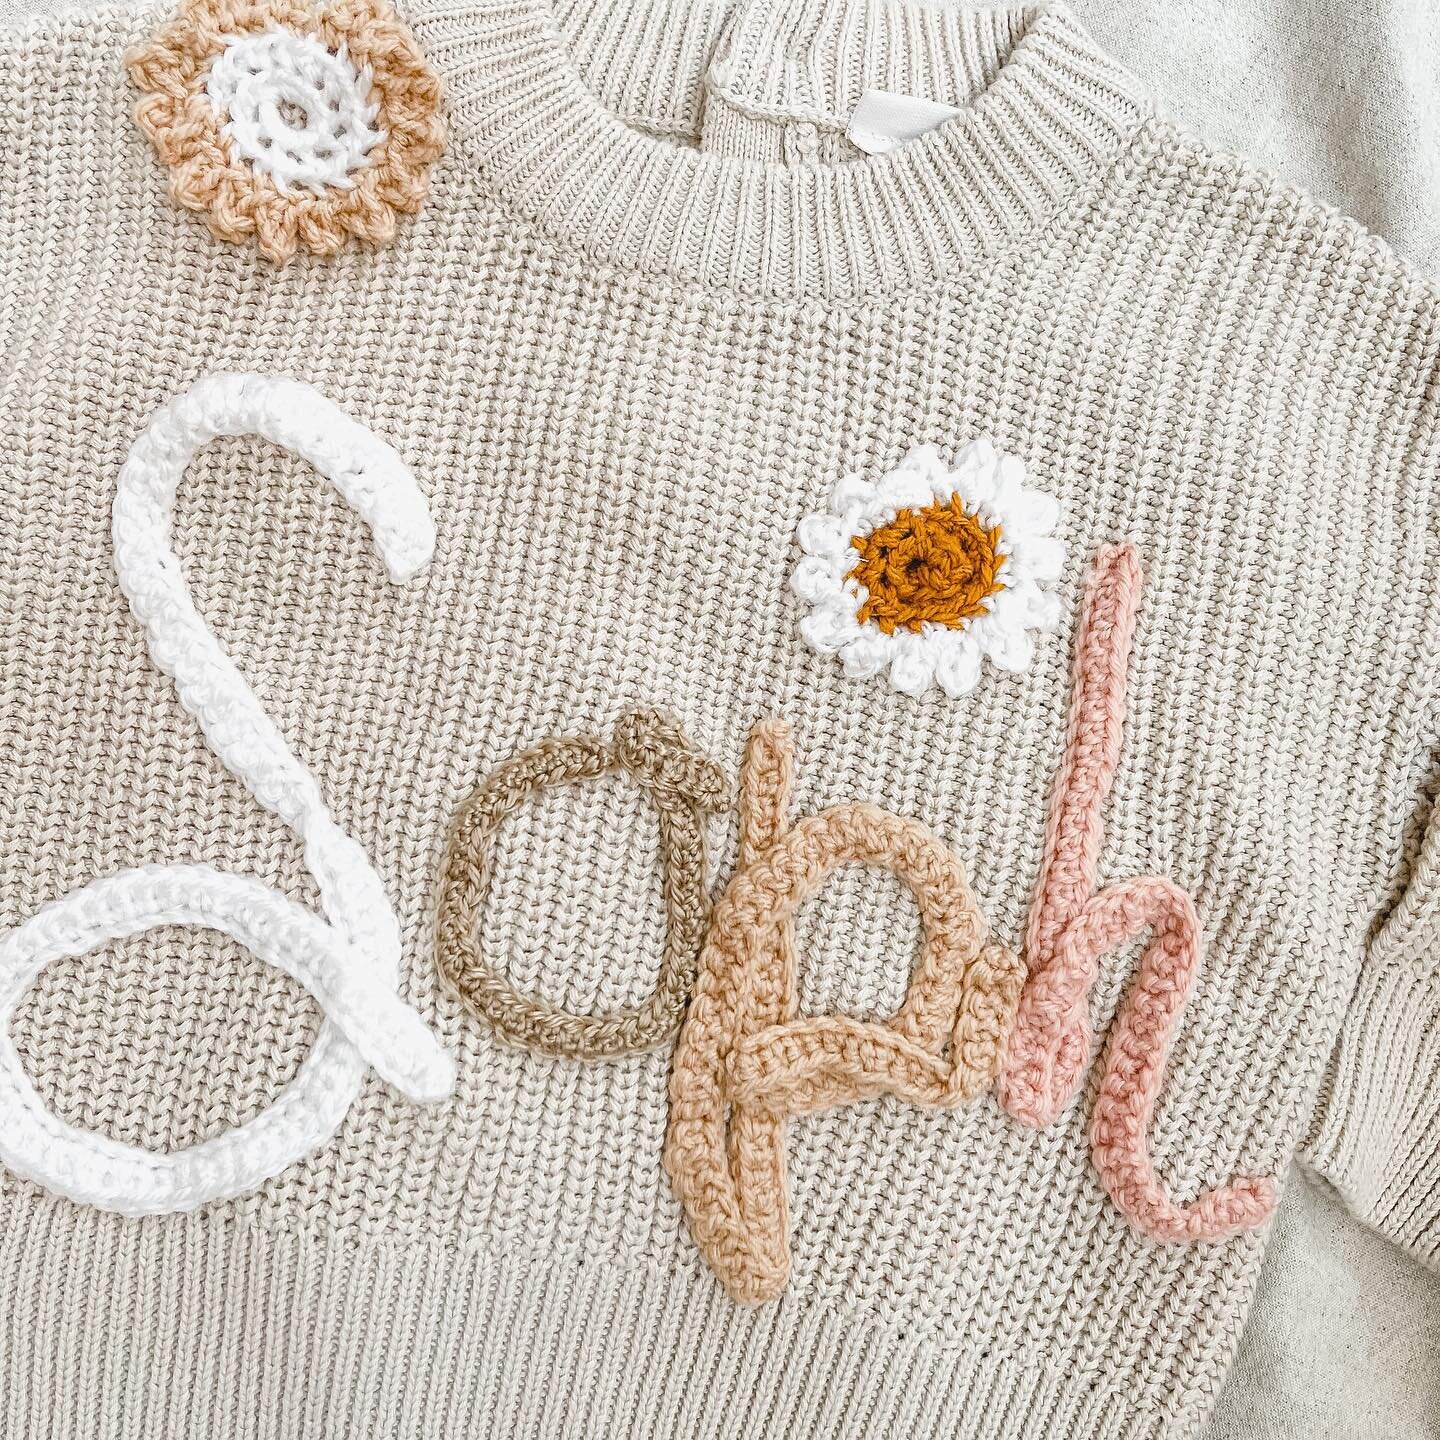 First batch of jumpers online now! And selling fast! 
Don&rsquo;t miss out 
Head to www.miffdesign.com.au

#jumper #namejumper #crochet #knit #kidscrochet #minijumper #babynamejumper #crochetjumper #monogram #personalised